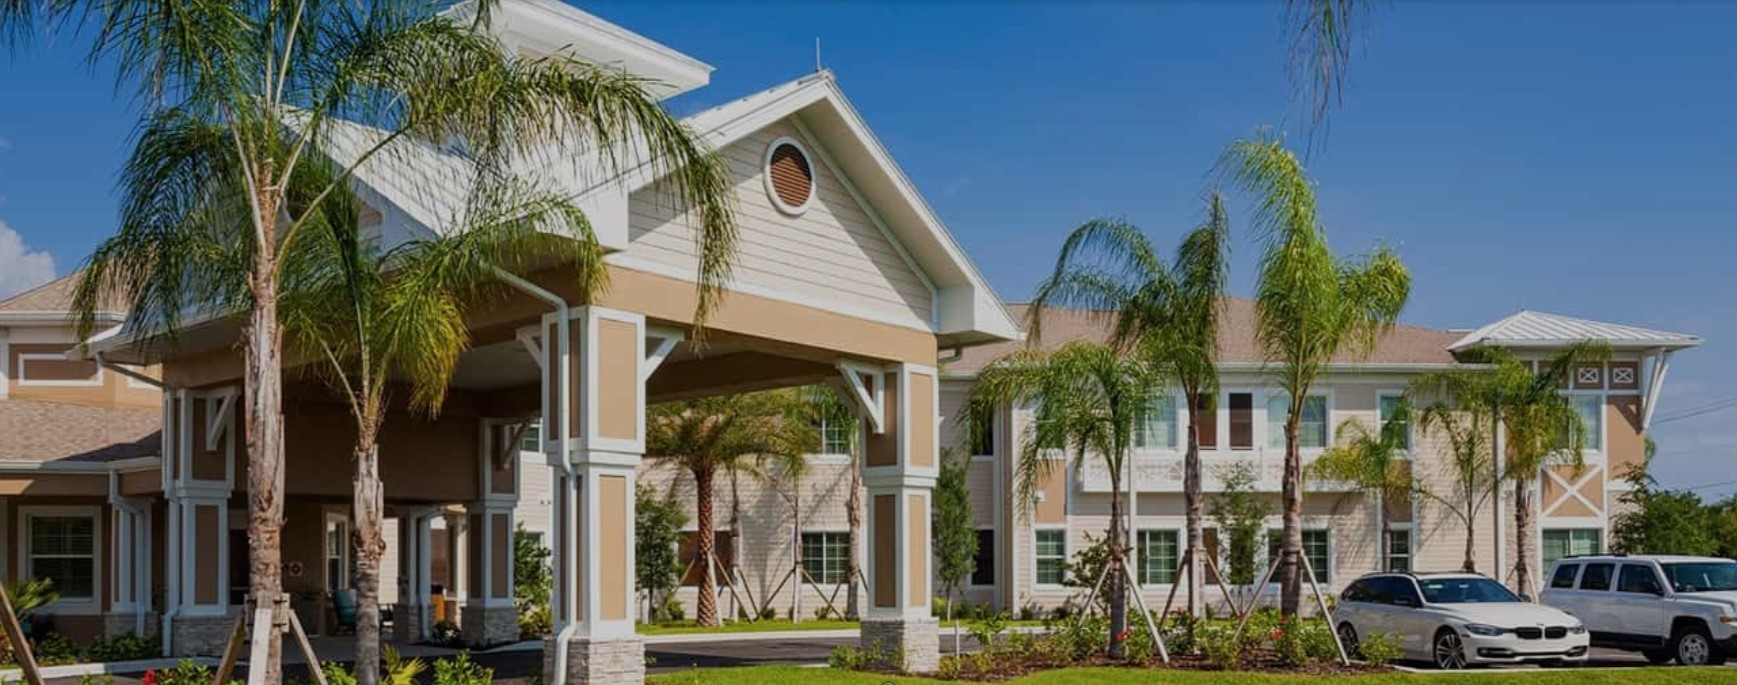 Pelican Landing Assisted Living & Memory Care